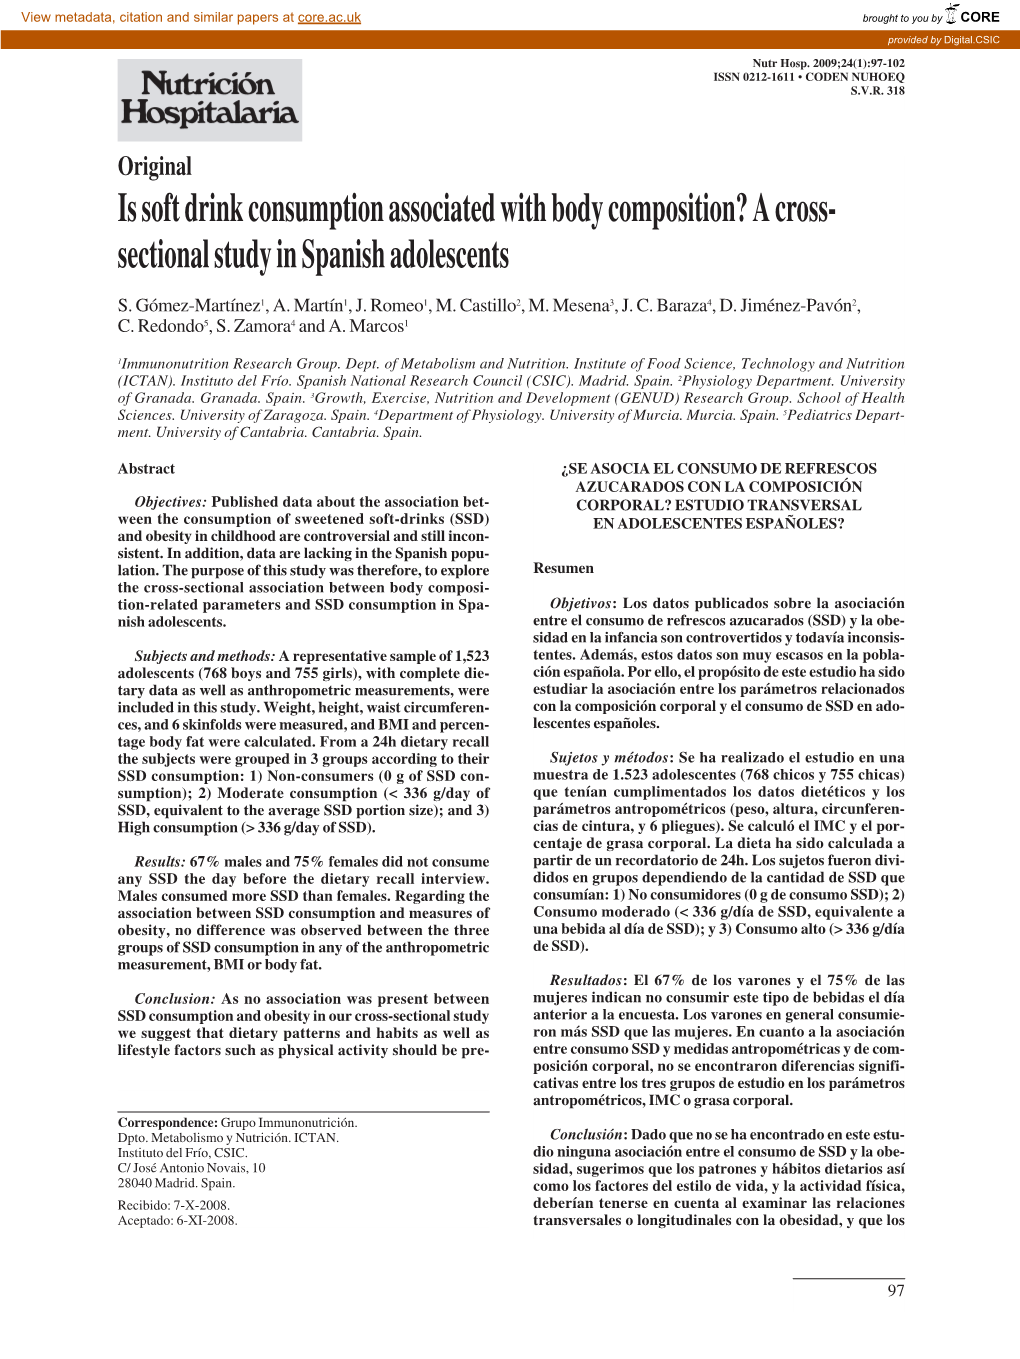 Is Soft Drink Consumption Associated with Body Composition? a Cross- Sectional Study in Spanish Adolescents